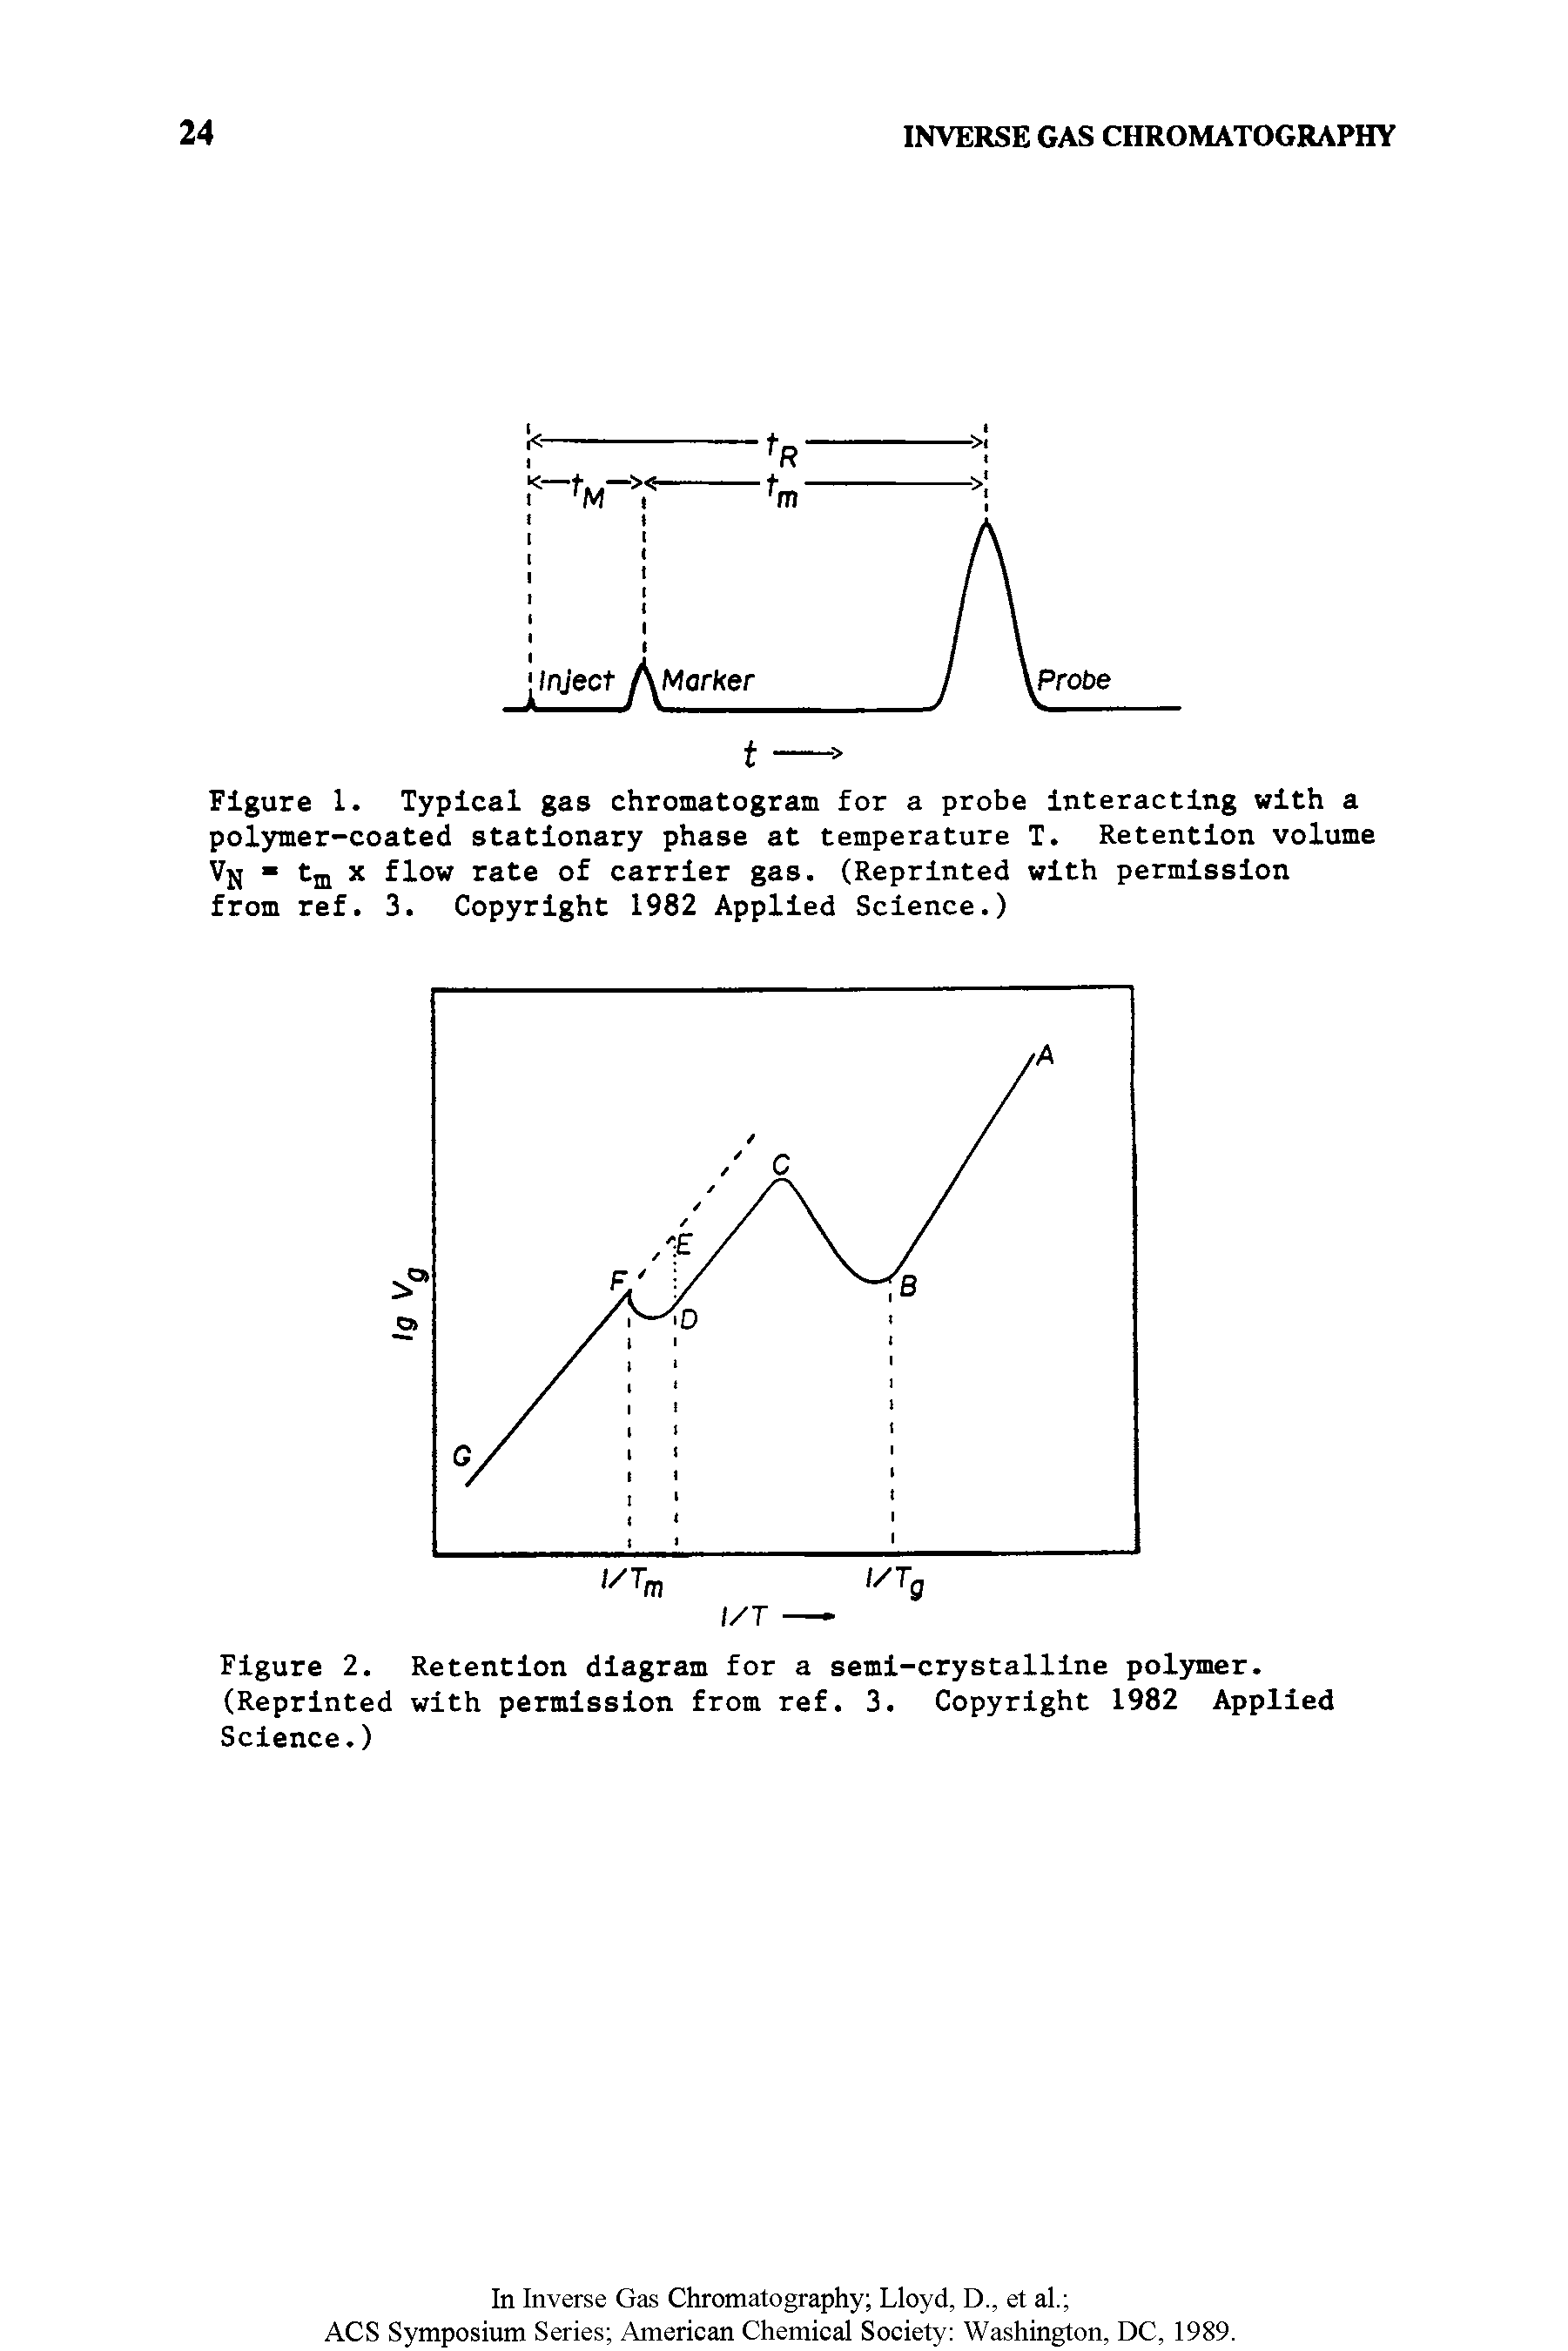 Figure 1. Typical gas chromatogram for a probe interacting with a polymer-coated stationary phase at temperature T. Retention volume -m x flow rate of carrier gas. (Reprinted with permission from ref. 3. Copyright 1982 Applied Science.)...